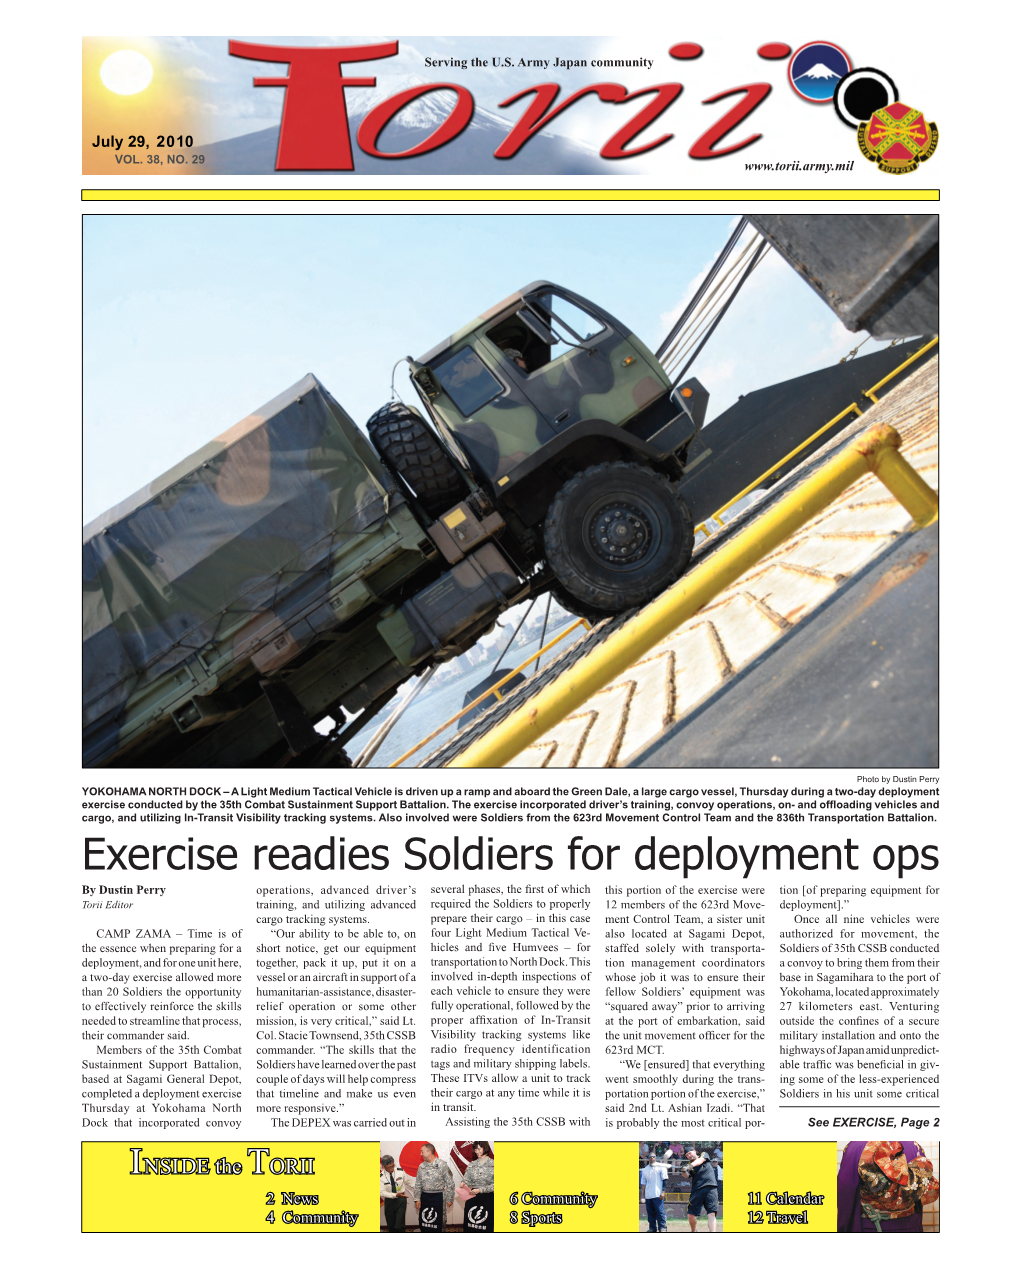 Exercise Readies Soldiers for Deployment